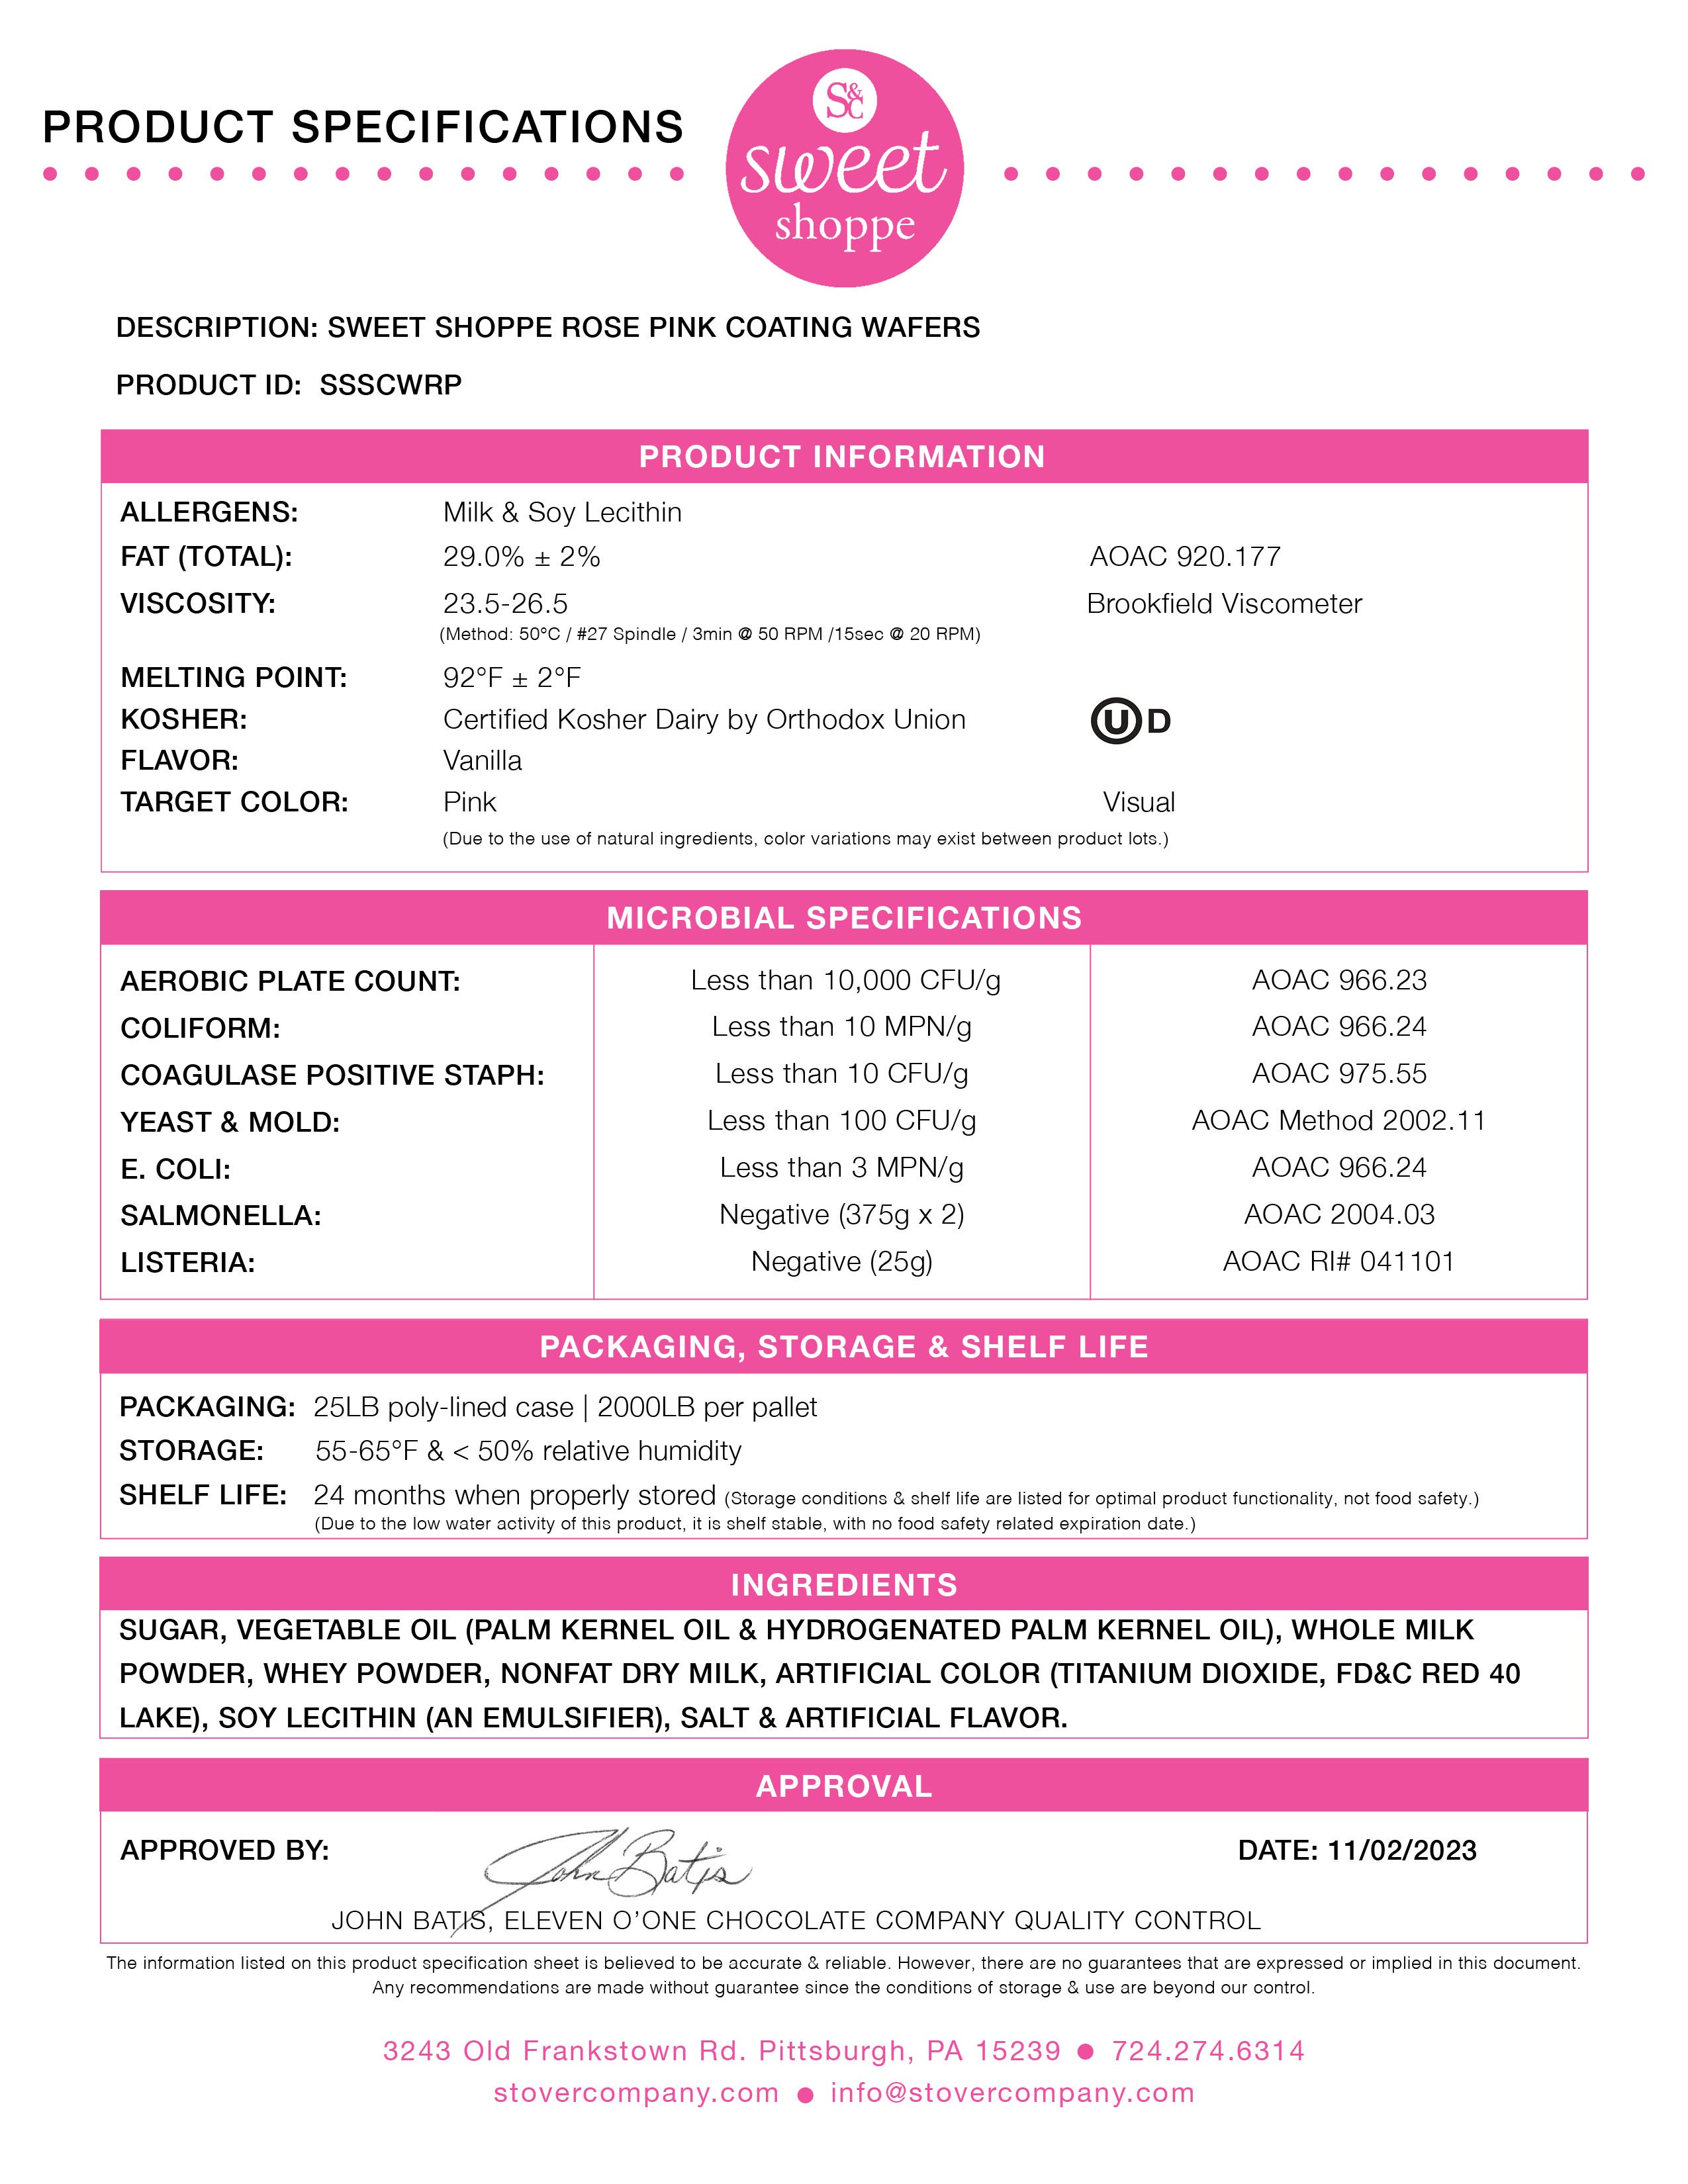 Sweet Shoppe Rose Pink Coating Wafers Nutritional Info by Stover & Company.